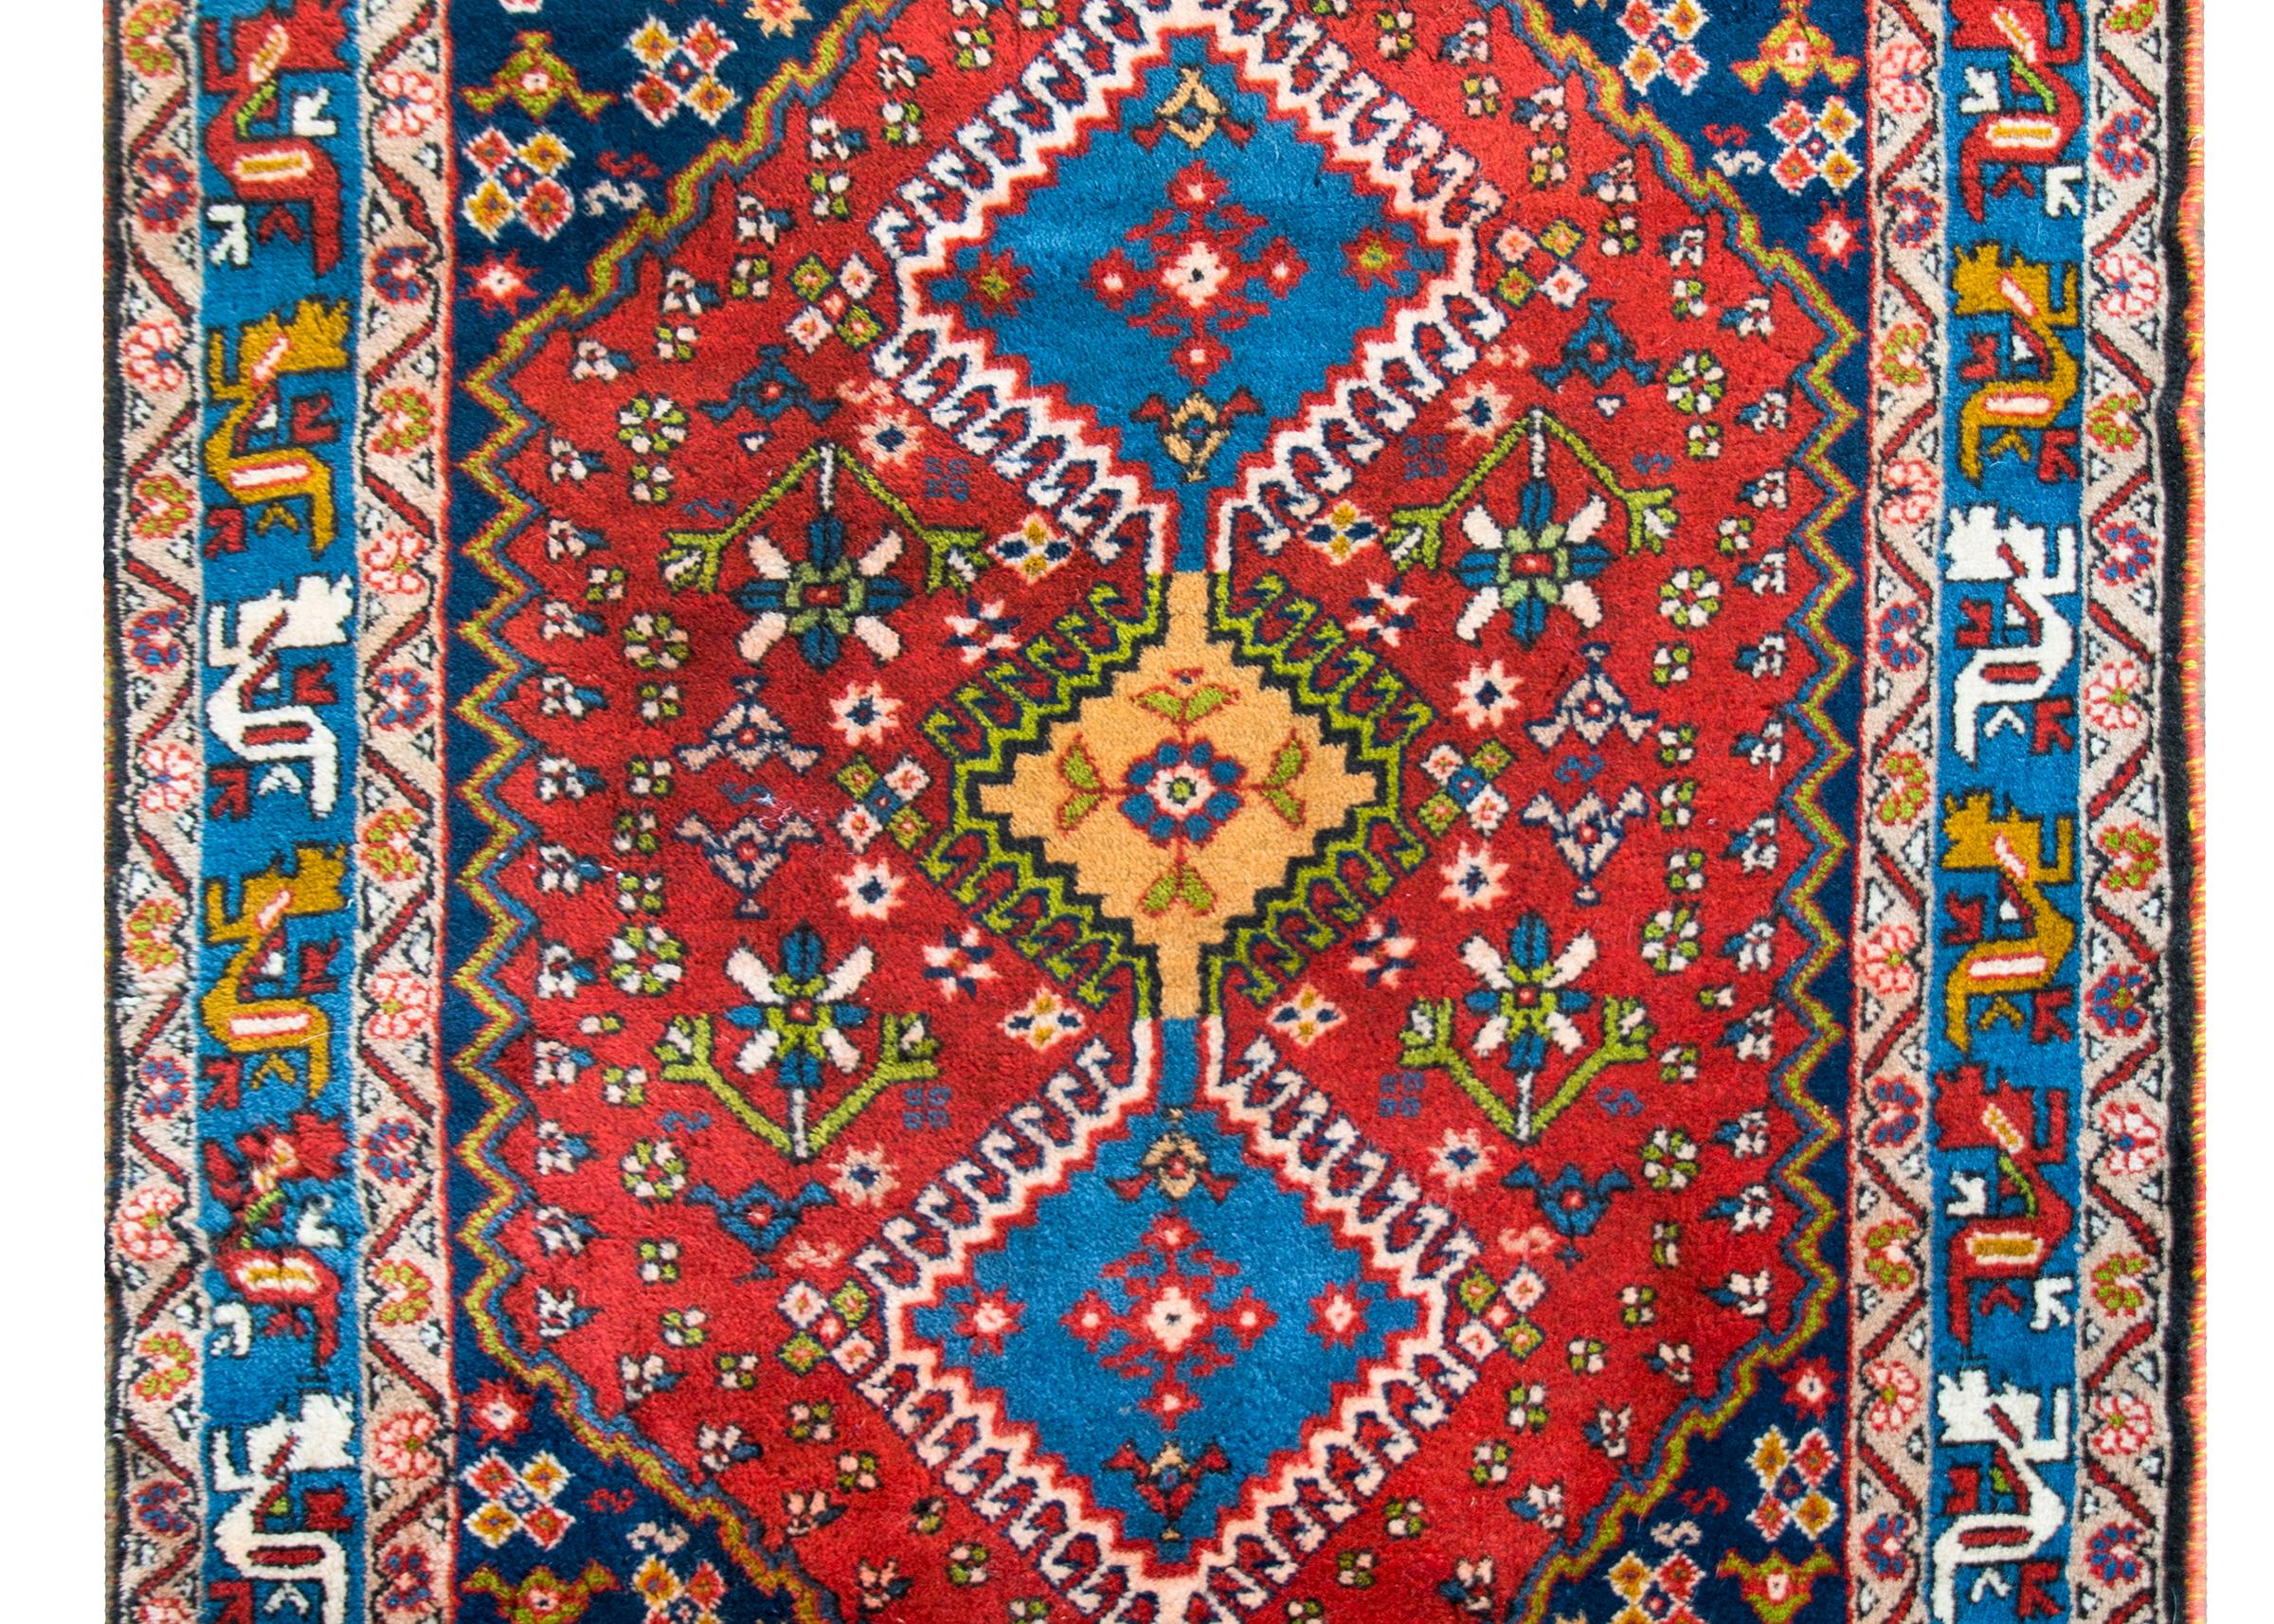 A bold and playful mid-20th century Persian Yallameh rug with three large central diamond medallions surrounded by stylized scrolling vines, and living amidst a field of more flowers, all surrounded by a wide border if multiple stylized flowers and